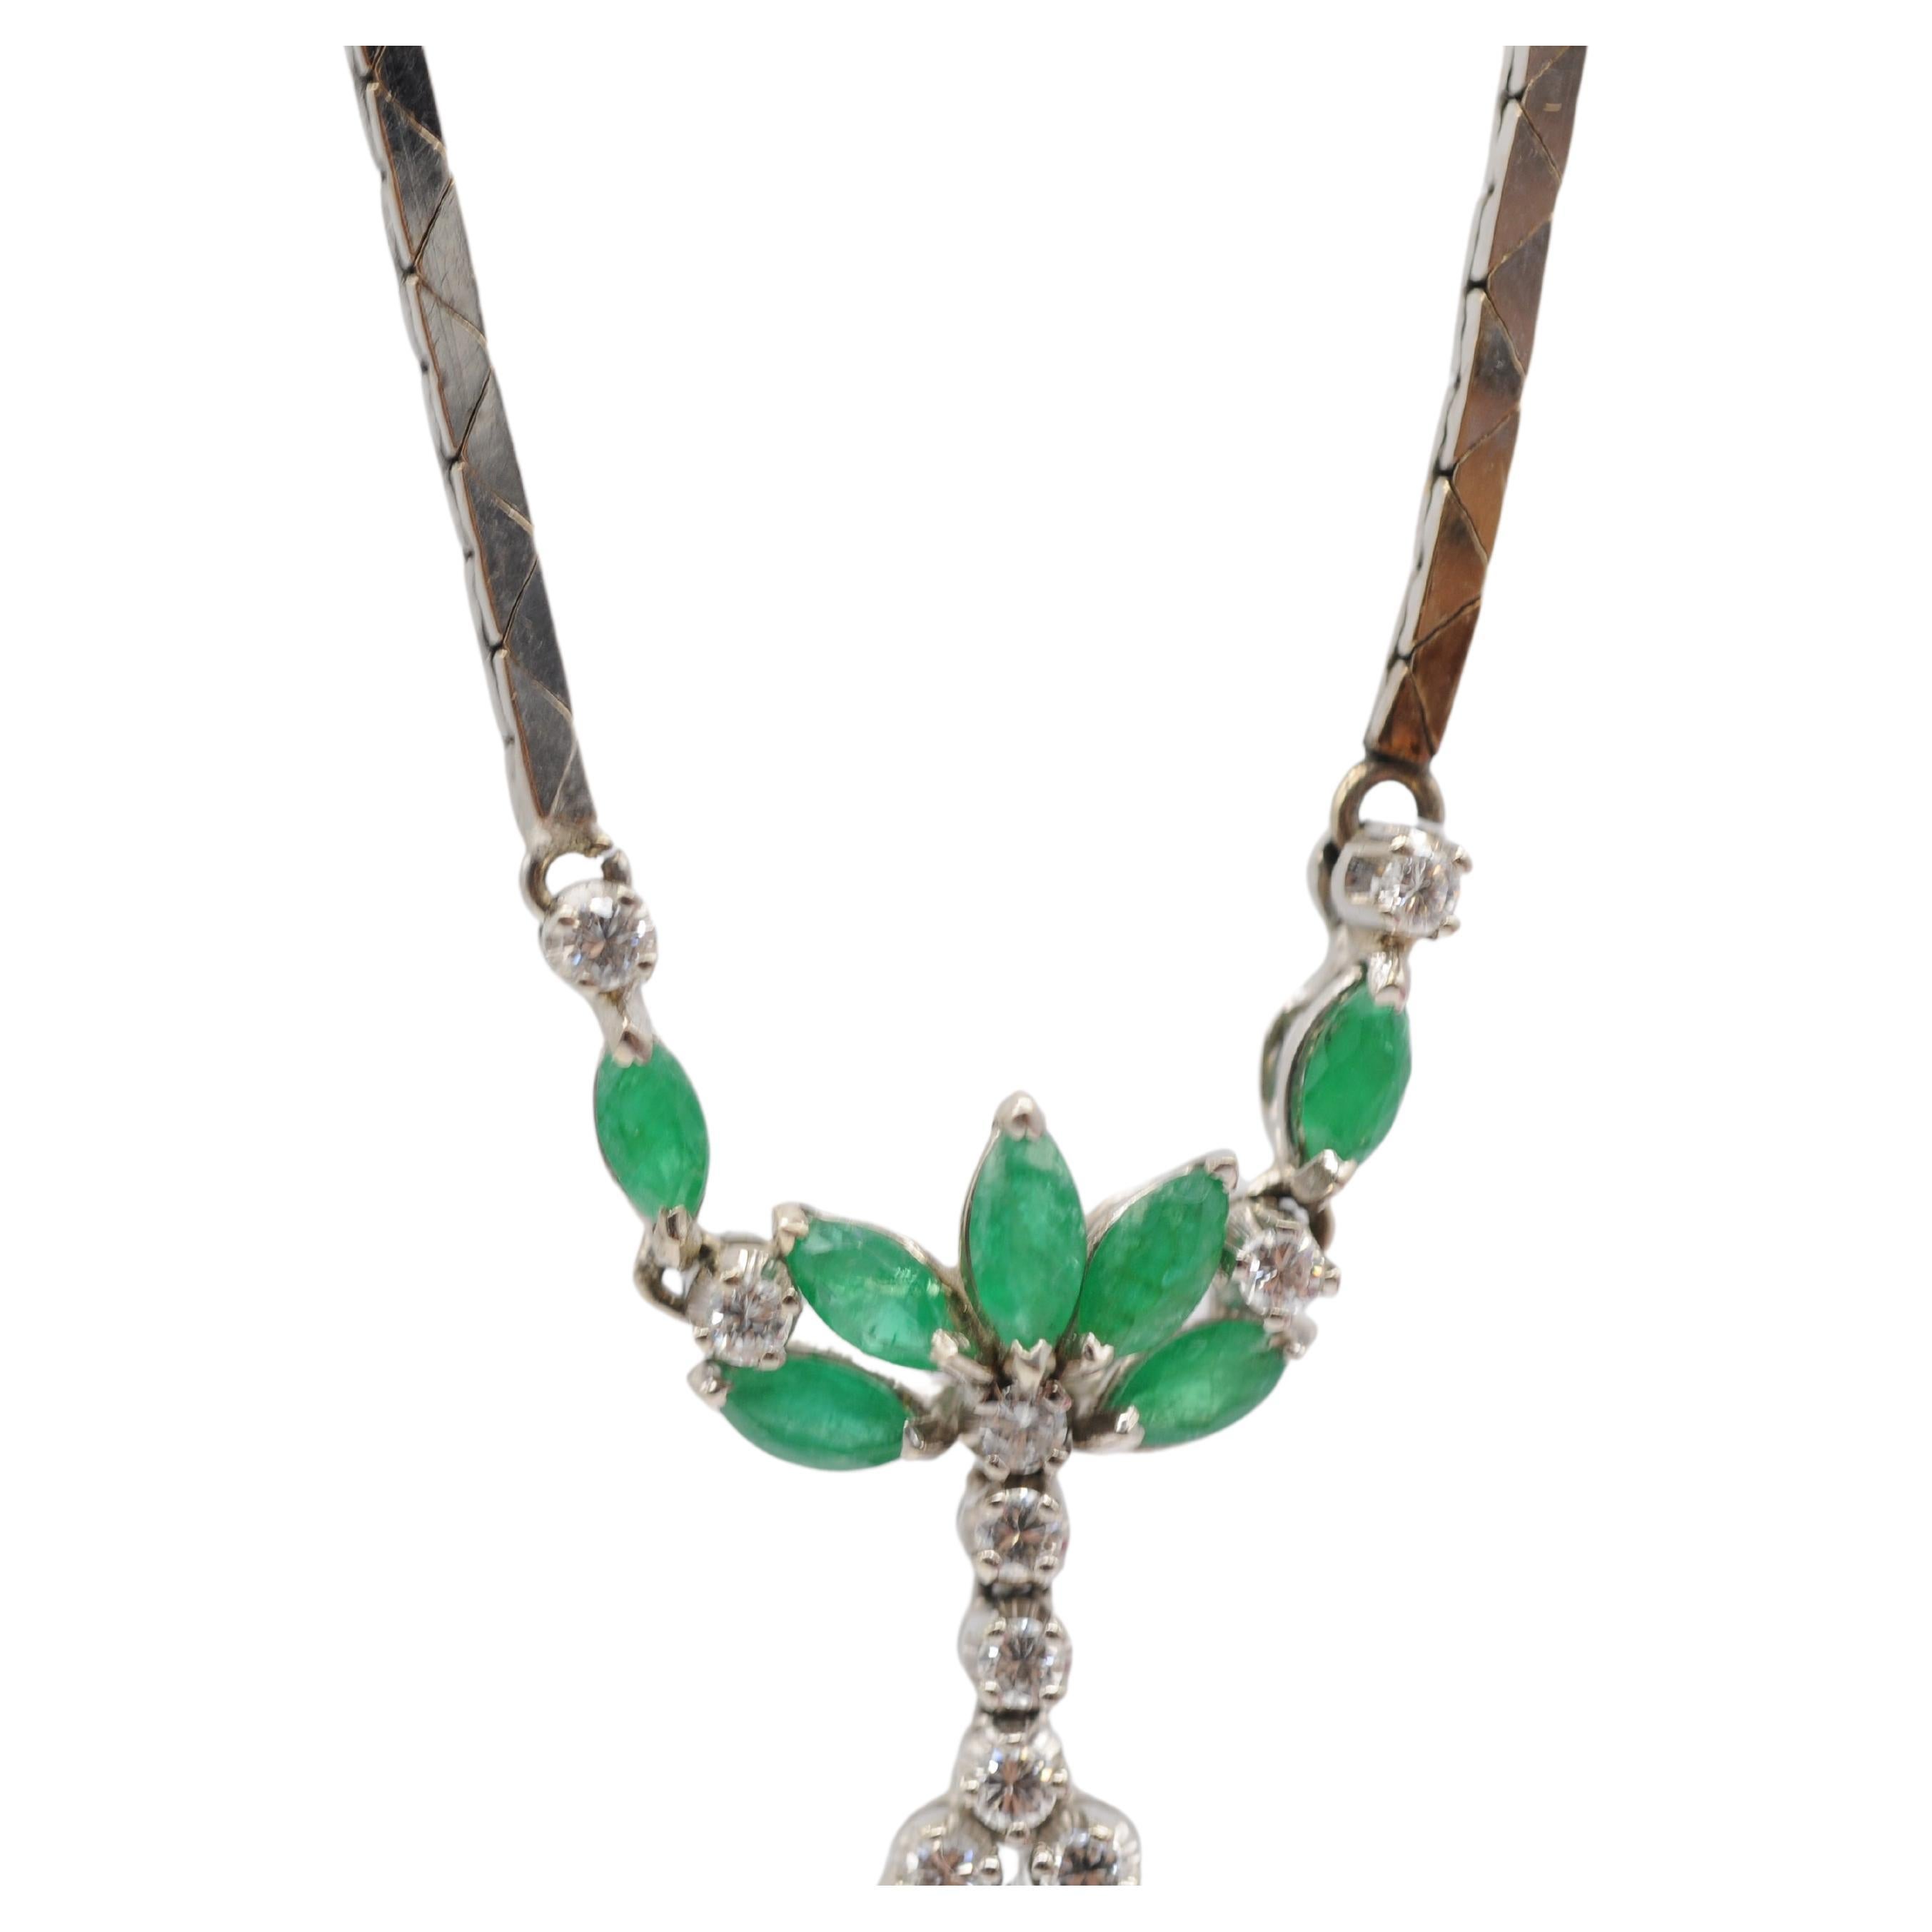 Women's or Men's Wonderful Art deco style dreamfull necklace with emeralds and diamonds For Sale